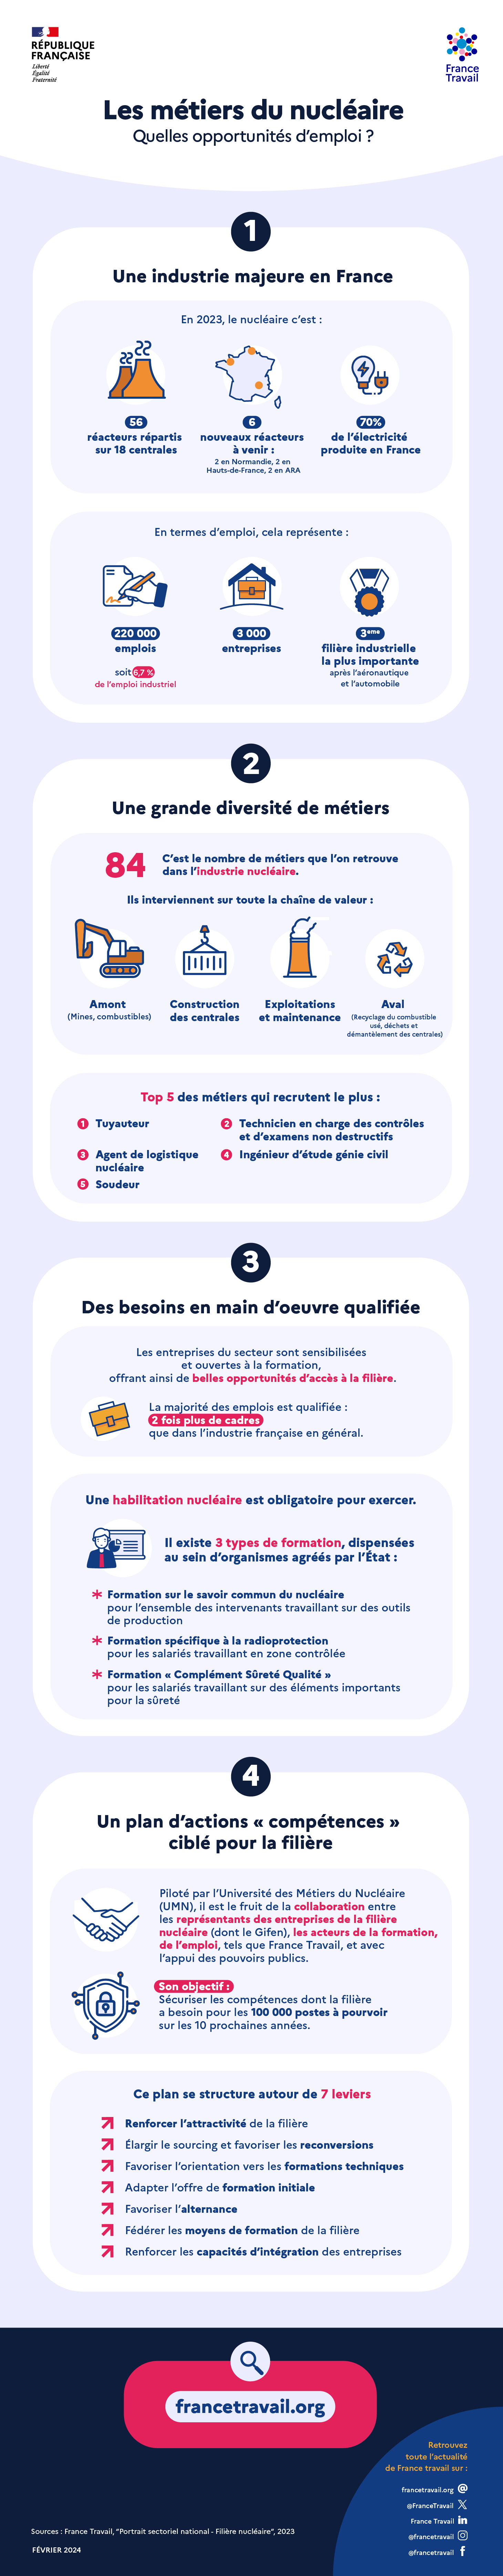 PE-Infographie-Metiers-nucleaire-v1.png